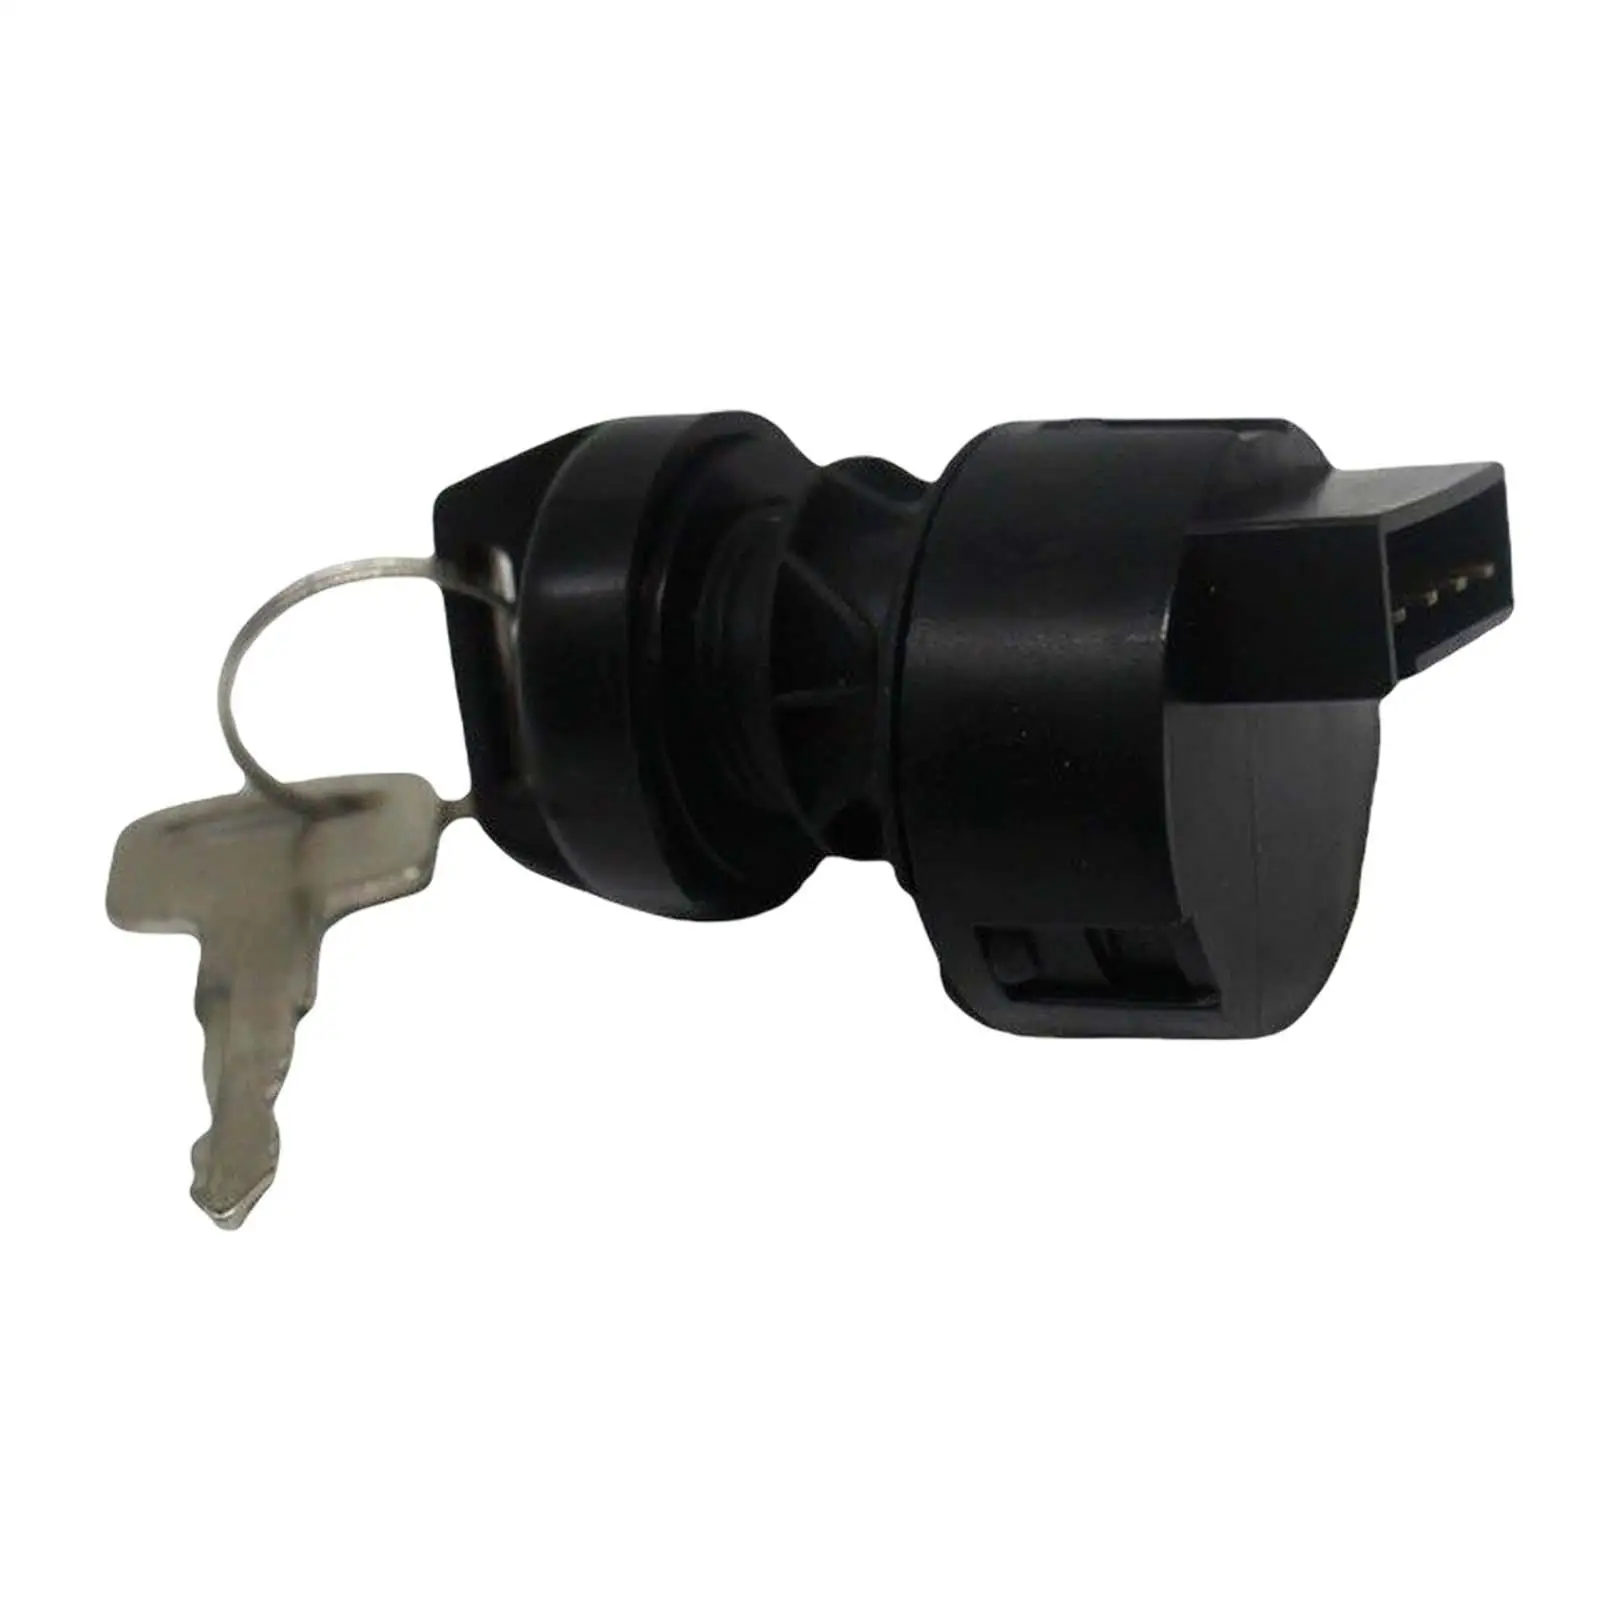 Ignition Switch Lock Replacement Practical Portable Parts Professional Easy to Install Black for 335 400 500 600